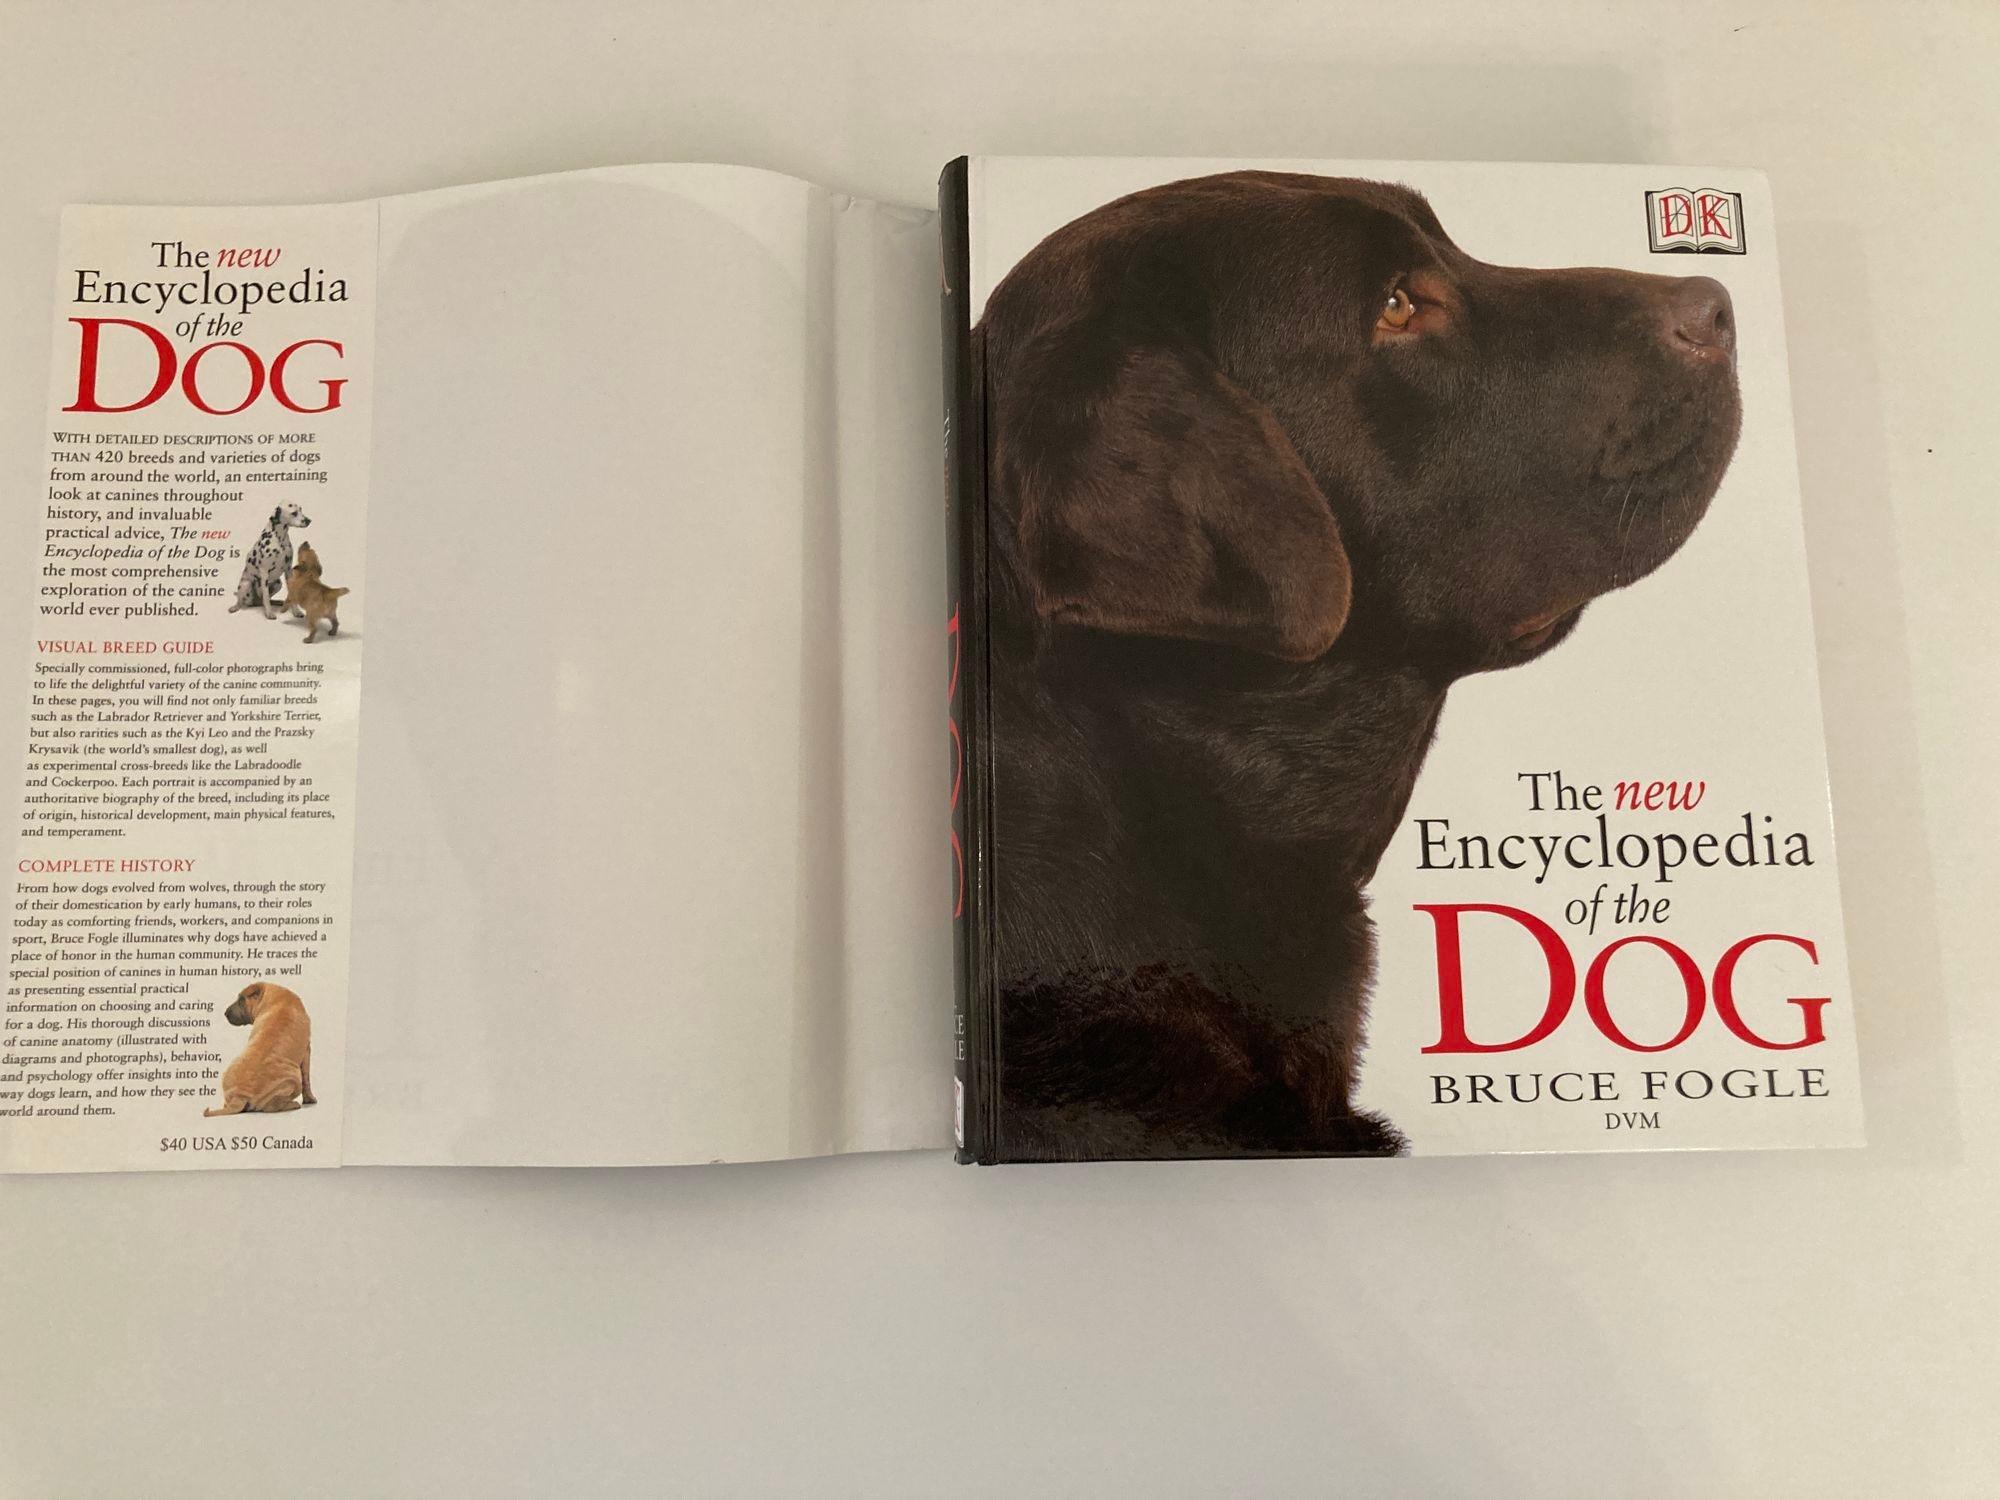 Expressionist New Encyclopedia of Dog Hardcover Book by Bruce Fogle For Sale